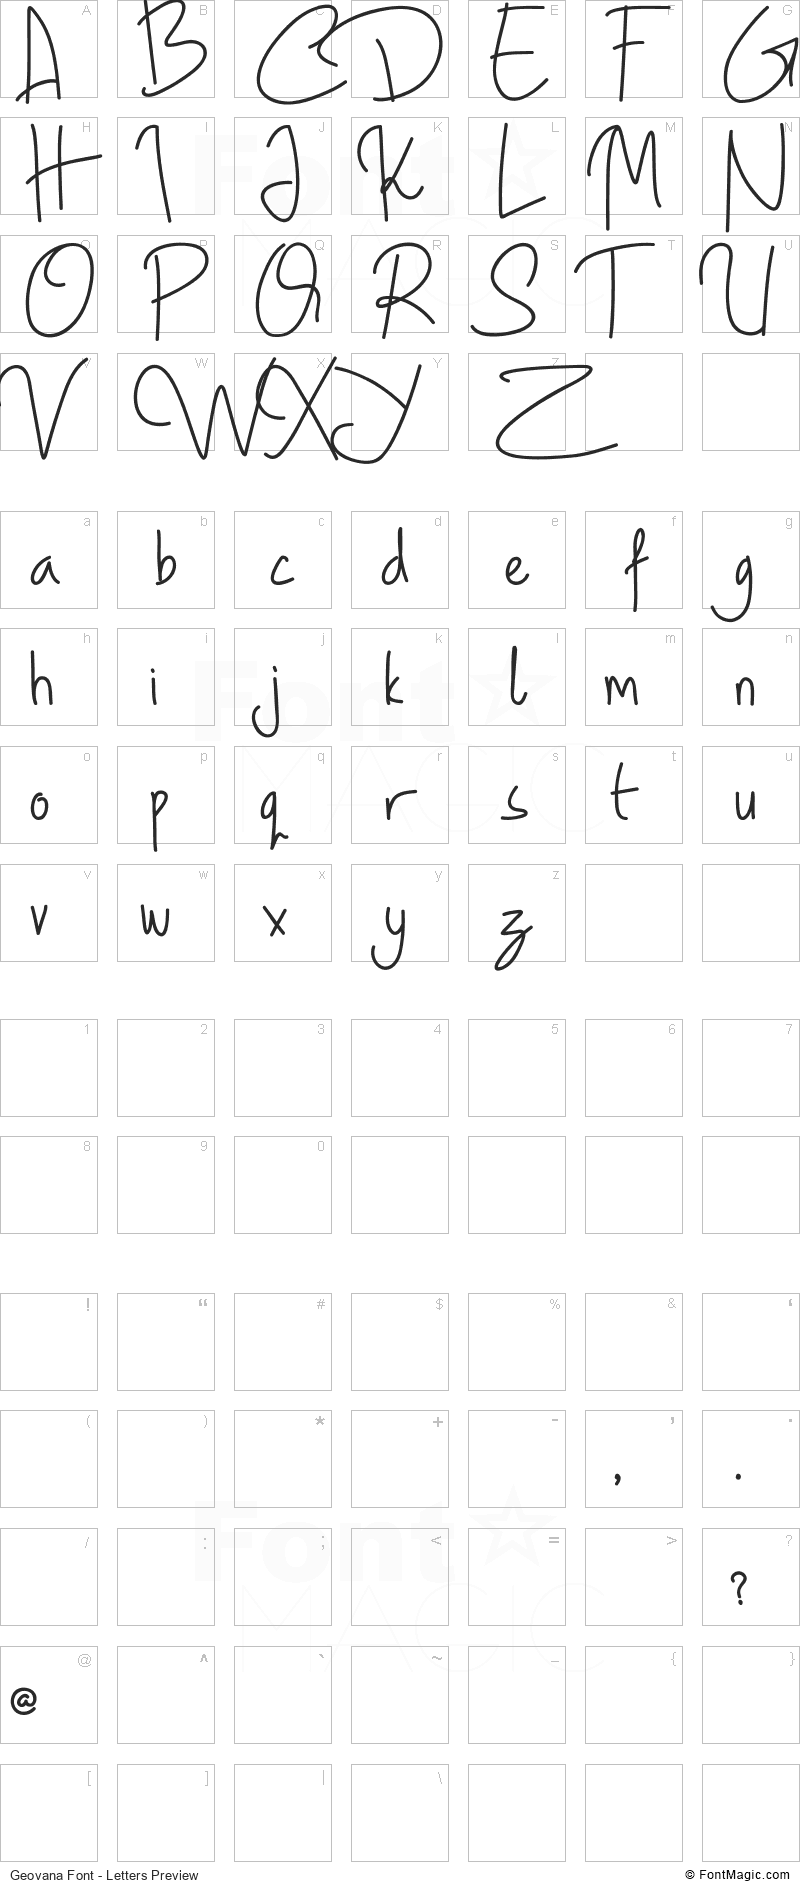 Geovana Font - All Latters Preview Chart